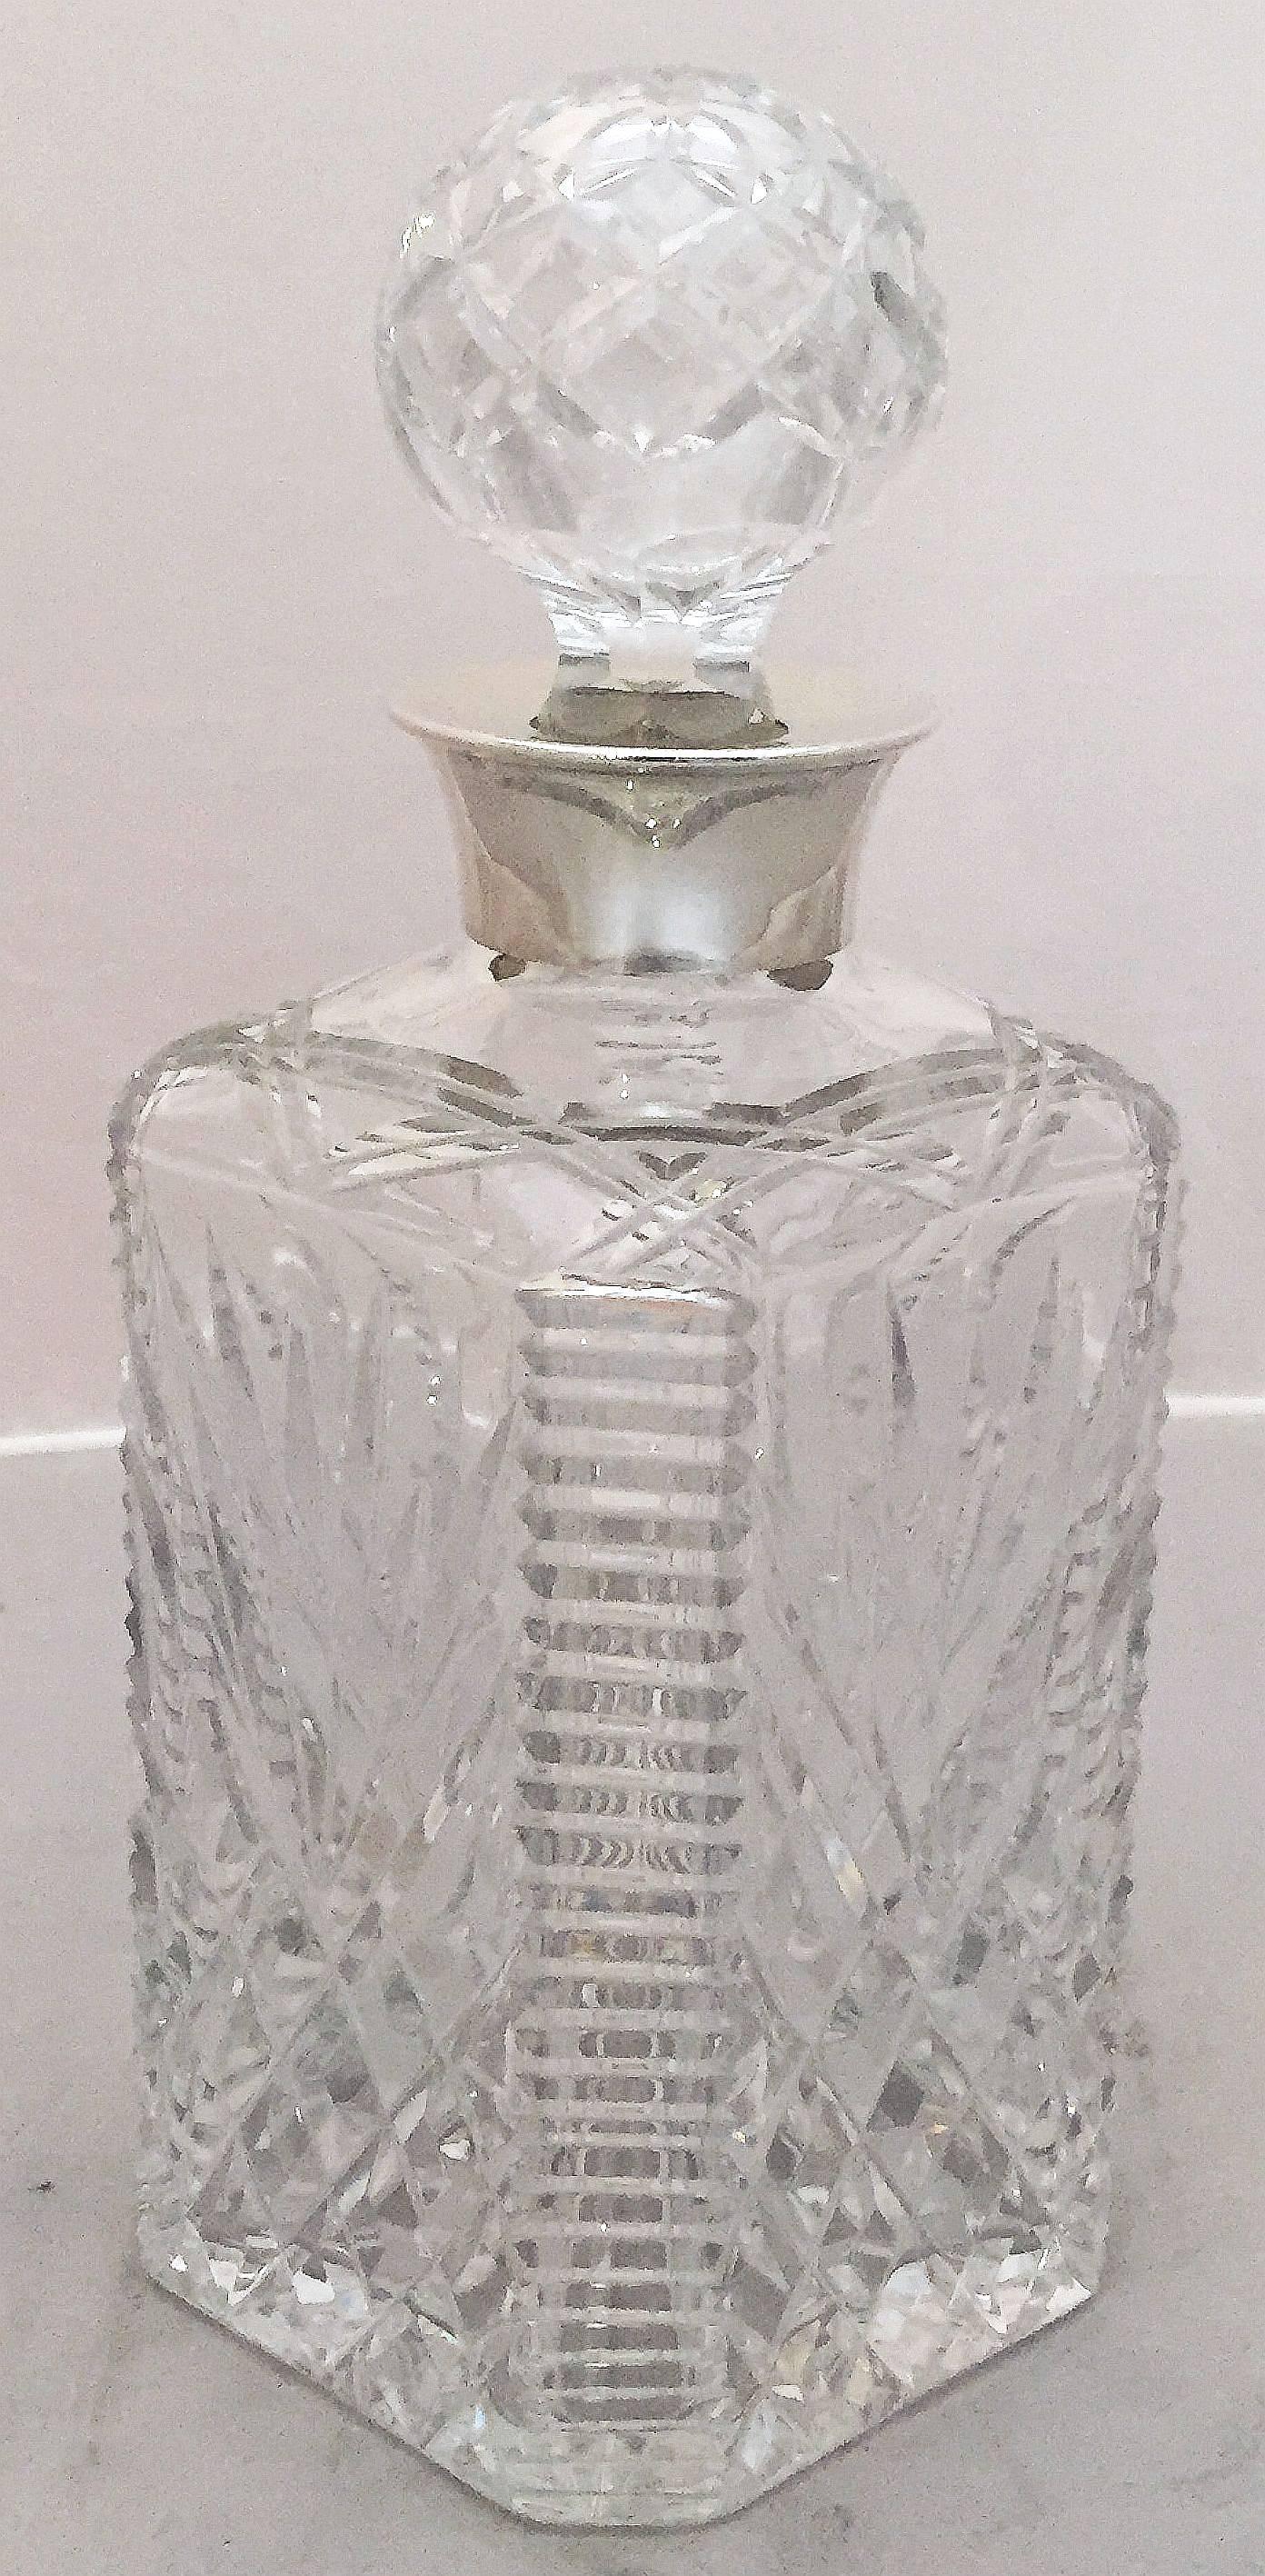 English Cut Crystal Spirits or Whiskey Decanter with Sterling Silver Collar 2